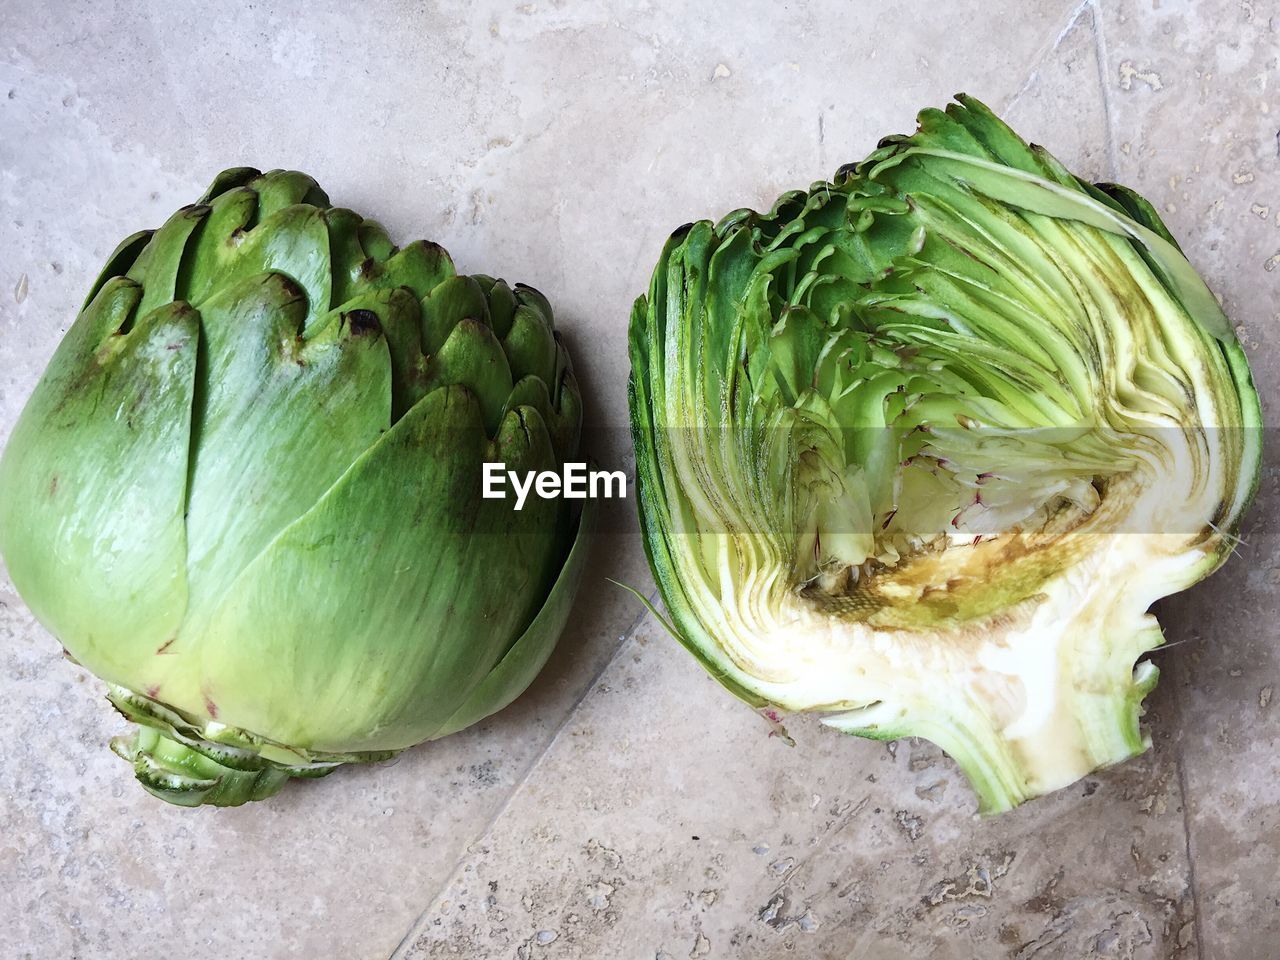 High angle view of halved artichoke on table